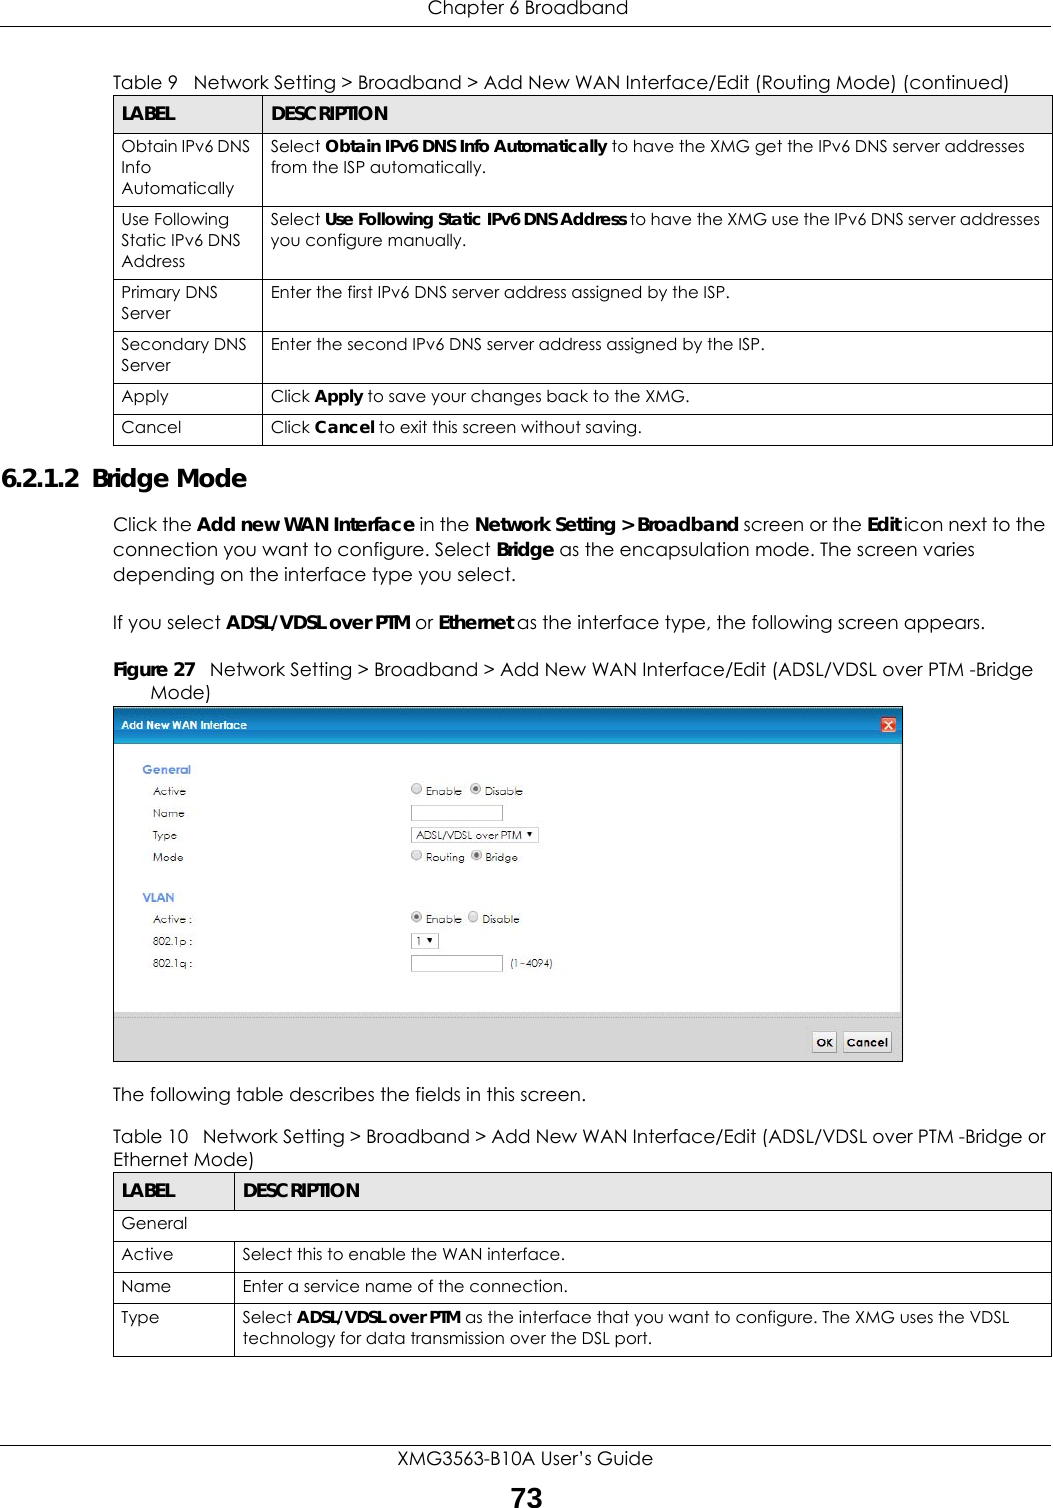  Chapter 6 BroadbandXMG3563-B10A User’s Guide736.2.1.2  Bridge ModeClick the Add new WAN Interface in the Network Setting &gt; Broadband screen or the Edit icon next to the connection you want to configure. Select Bridge as the encapsulation mode. The screen varies depending on the interface type you select. If you select ADSL/VDSL over PTM or Ethernet as the interface type, the following screen appears.Figure 27   Network Setting &gt; Broadband &gt; Add New WAN Interface/Edit (ADSL/VDSL over PTM -Bridge Mode)The following table describes the fields in this screen.Obtain IPv6 DNS Info AutomaticallySelect Obtain IPv6 DNS Info Automatically to have the XMG get the IPv6 DNS server addresses from the ISP automatically.Use Following Static IPv6 DNS AddressSelect Use Following Static IPv6 DNS Address to have the XMG use the IPv6 DNS server addresses you configure manually.Primary DNS ServerEnter the first IPv6 DNS server address assigned by the ISP.Secondary DNS ServerEnter the second IPv6 DNS server address assigned by the ISP.Apply Click Apply to save your changes back to the XMG.Cancel Click Cancel to exit this screen without saving.Table 9   Network Setting &gt; Broadband &gt; Add New WAN Interface/Edit (Routing Mode) (continued)LABEL DESCRIPTIONTable 10   Network Setting &gt; Broadband &gt; Add New WAN Interface/Edit (ADSL/VDSL over PTM -Bridge or Ethernet Mode)LABEL DESCRIPTIONGeneralActive Select this to enable the WAN interface.Name Enter a service name of the connection.Type Select ADSL/VDSL over PTM as the interface that you want to configure. The XMG uses the VDSL technology for data transmission over the DSL port.